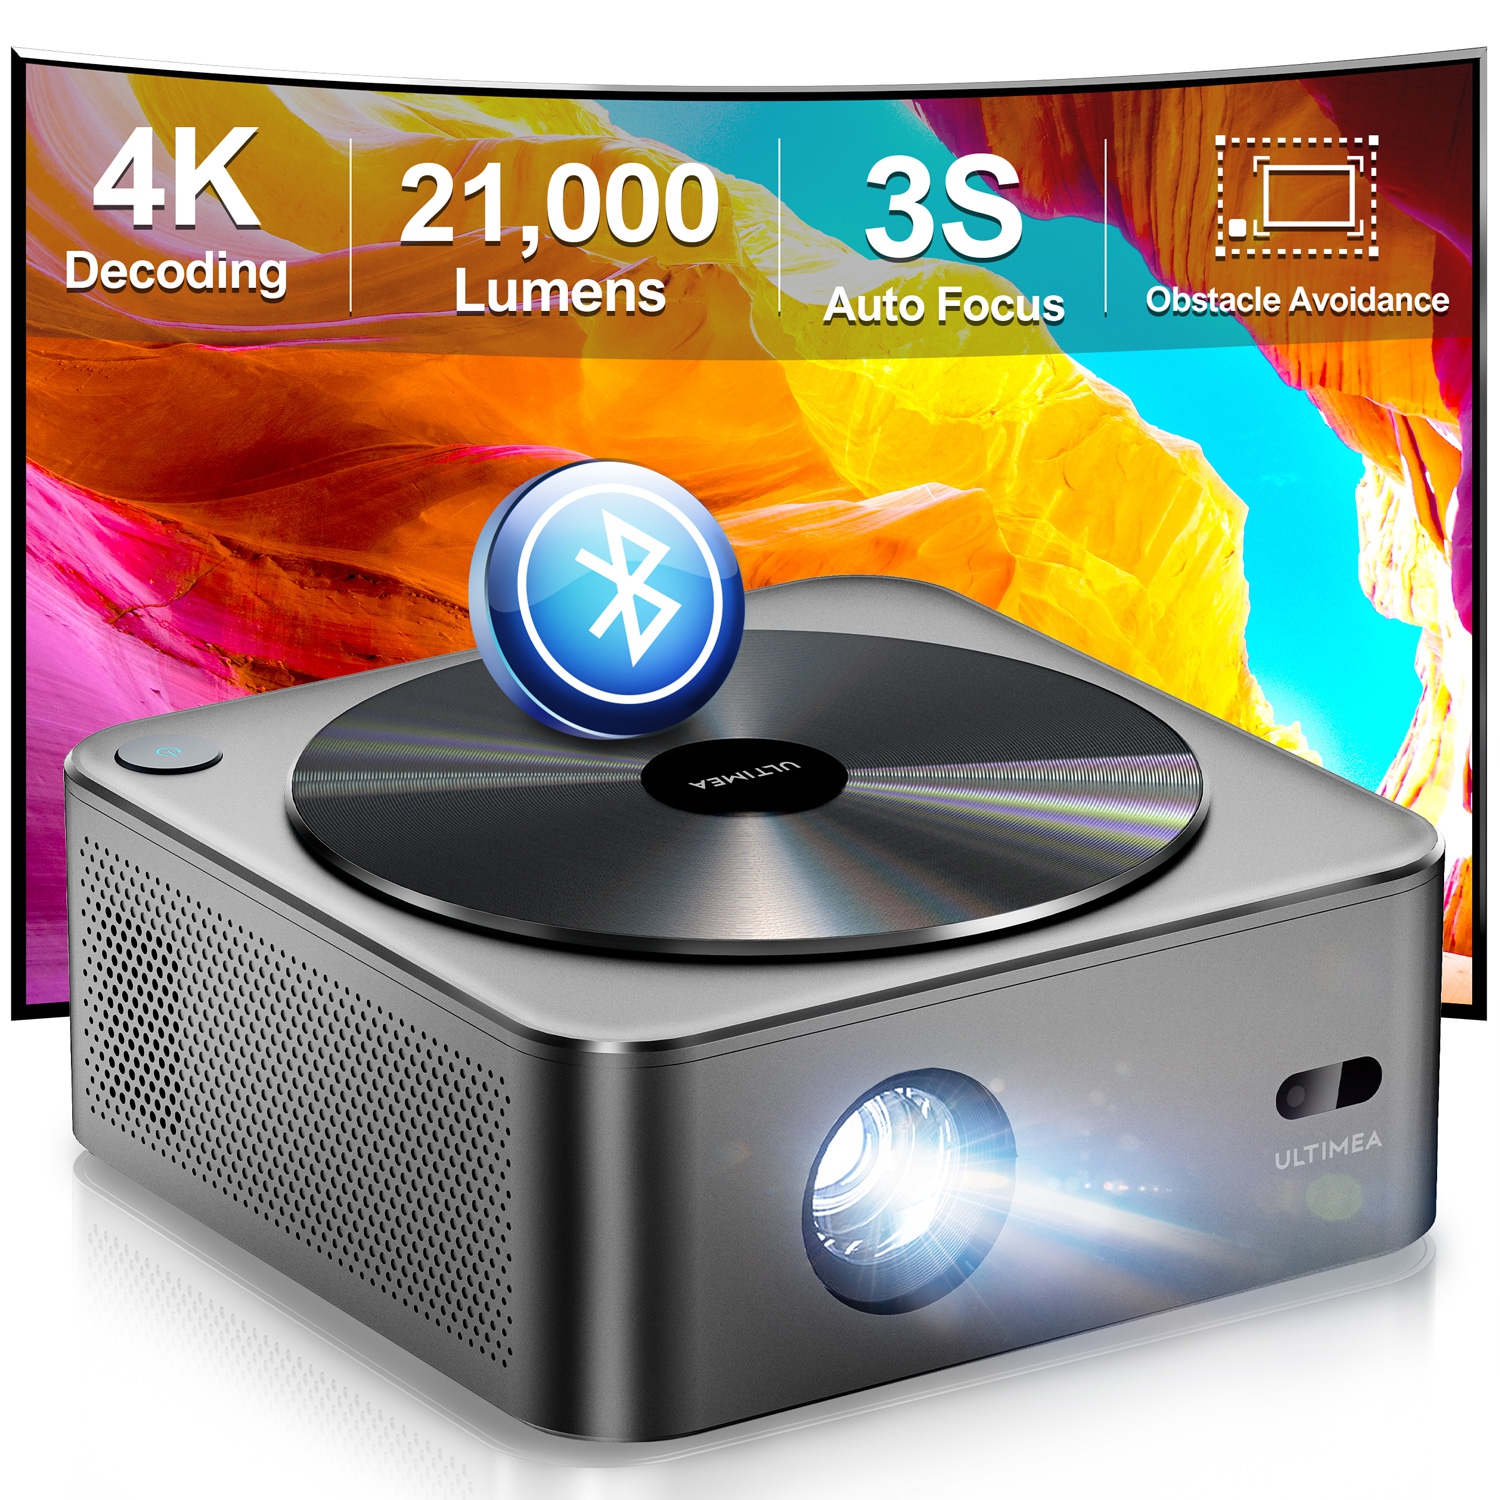 [4K Projector & HDR 10] ULTIMEA Auto Focus Smart Projector, Native 1080P 700 ANSI, with WiFi 6 and Bluetooth 5.2, Home Theater Projector with 6D Auto Keystone，Apollo P40